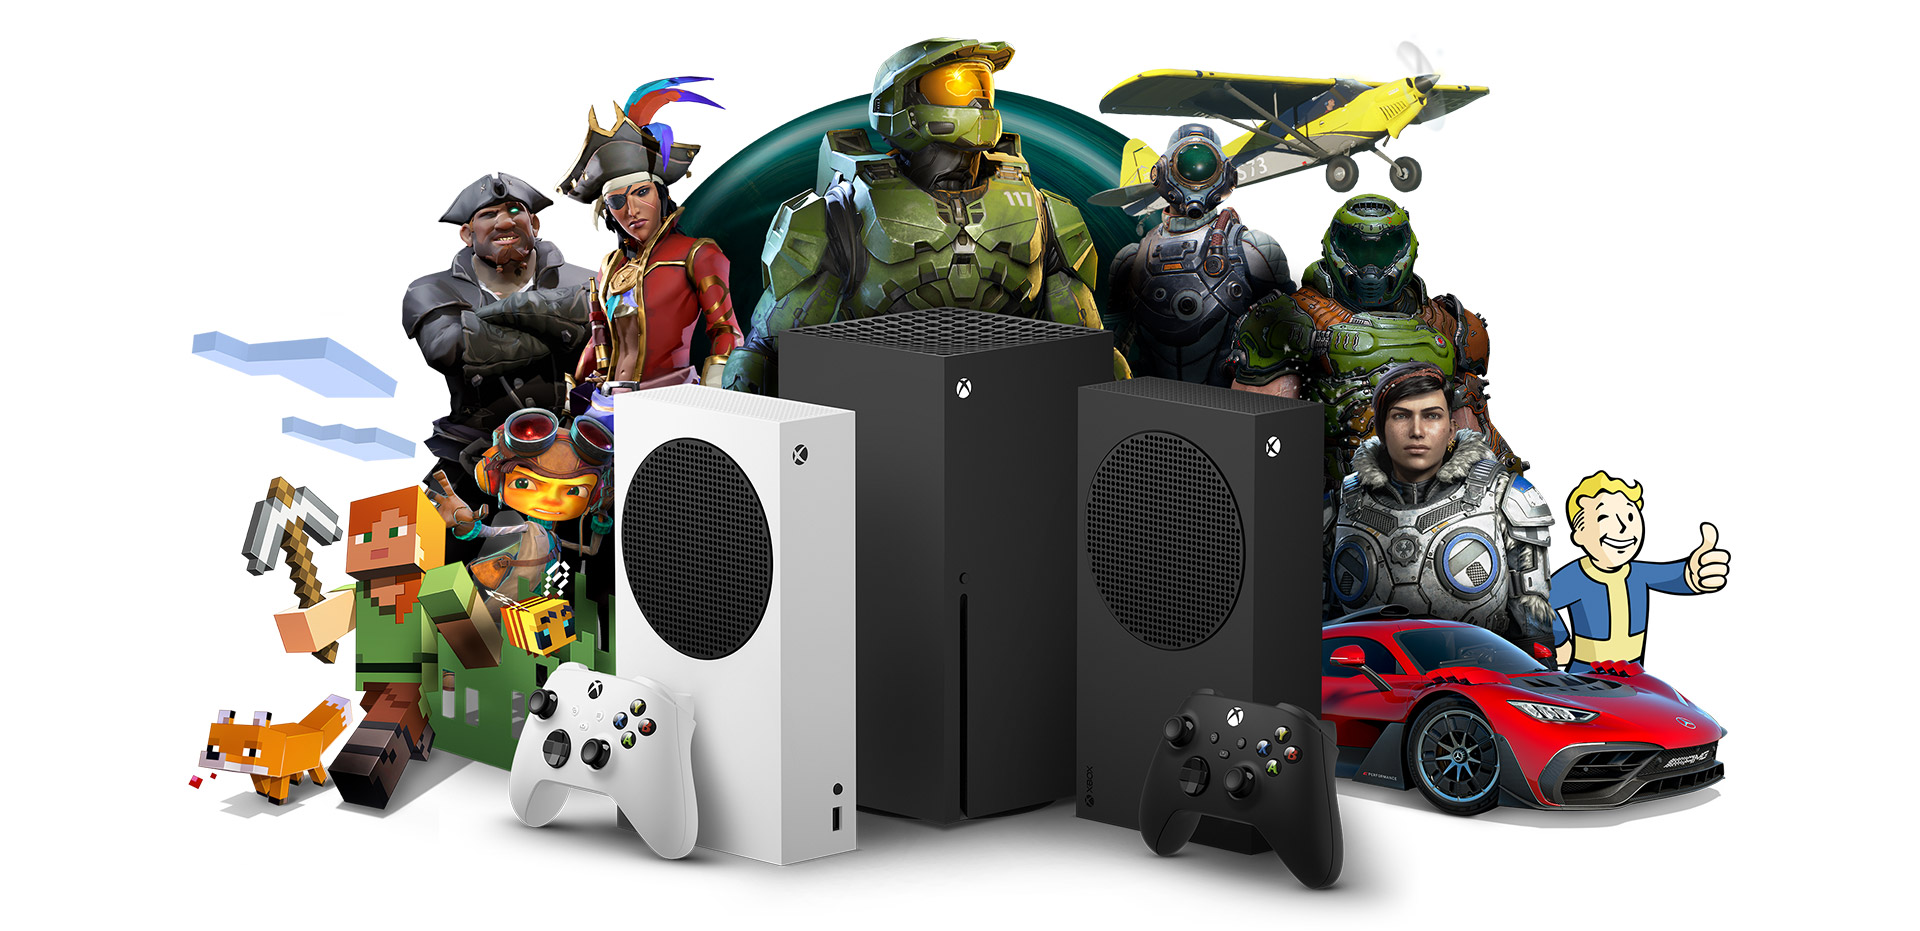 Xbox All Access, Xbox Series X, Xbox Series S and Xbox Series S - 1TB with Xbox game characters.